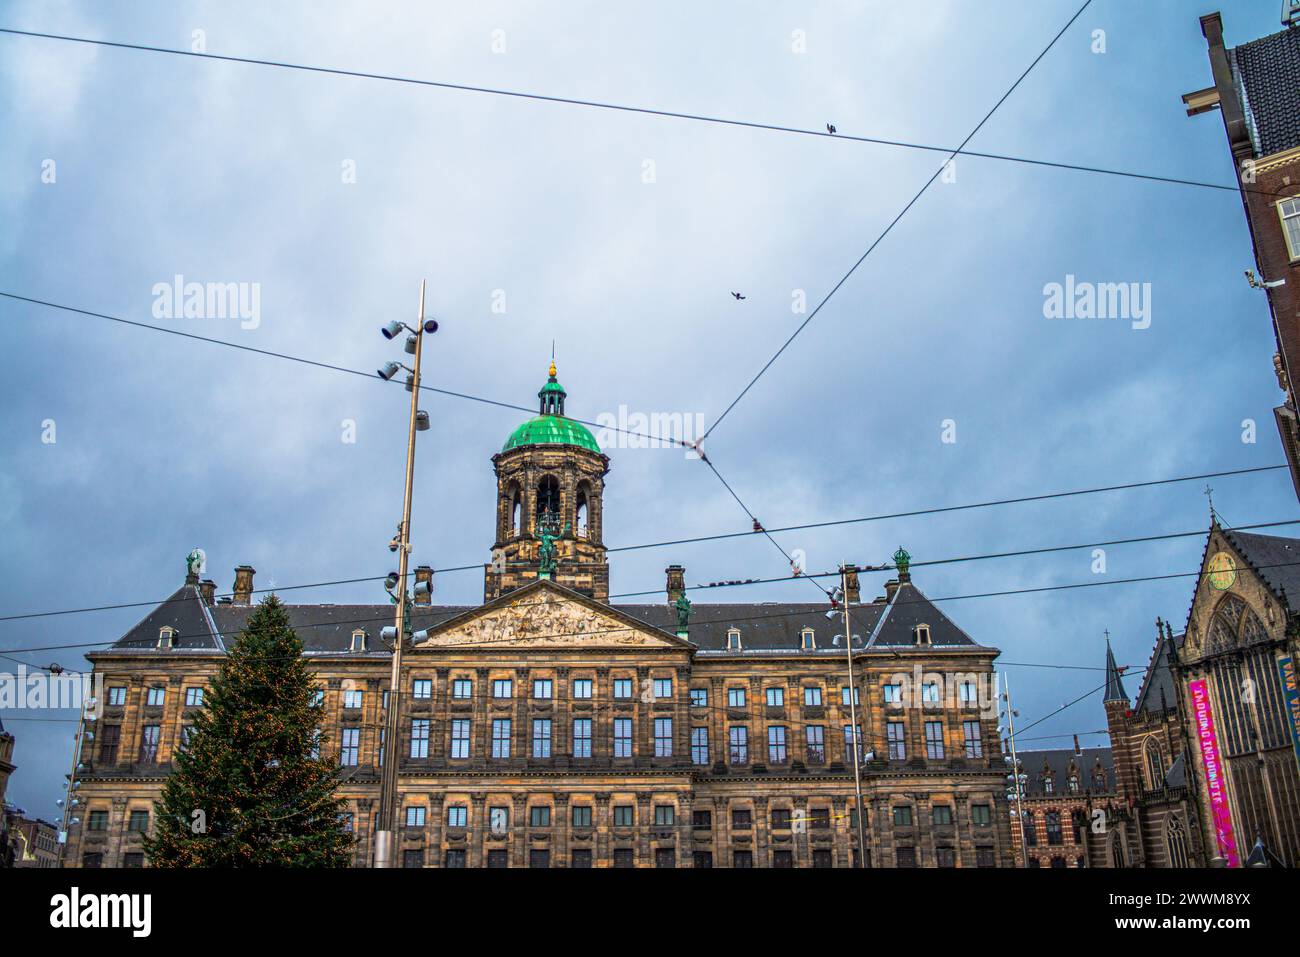 Dome Square in Amsterdam embodies historic charm and architectural beauty, with its iconic dome building and lively atmosphere. Stock Photo